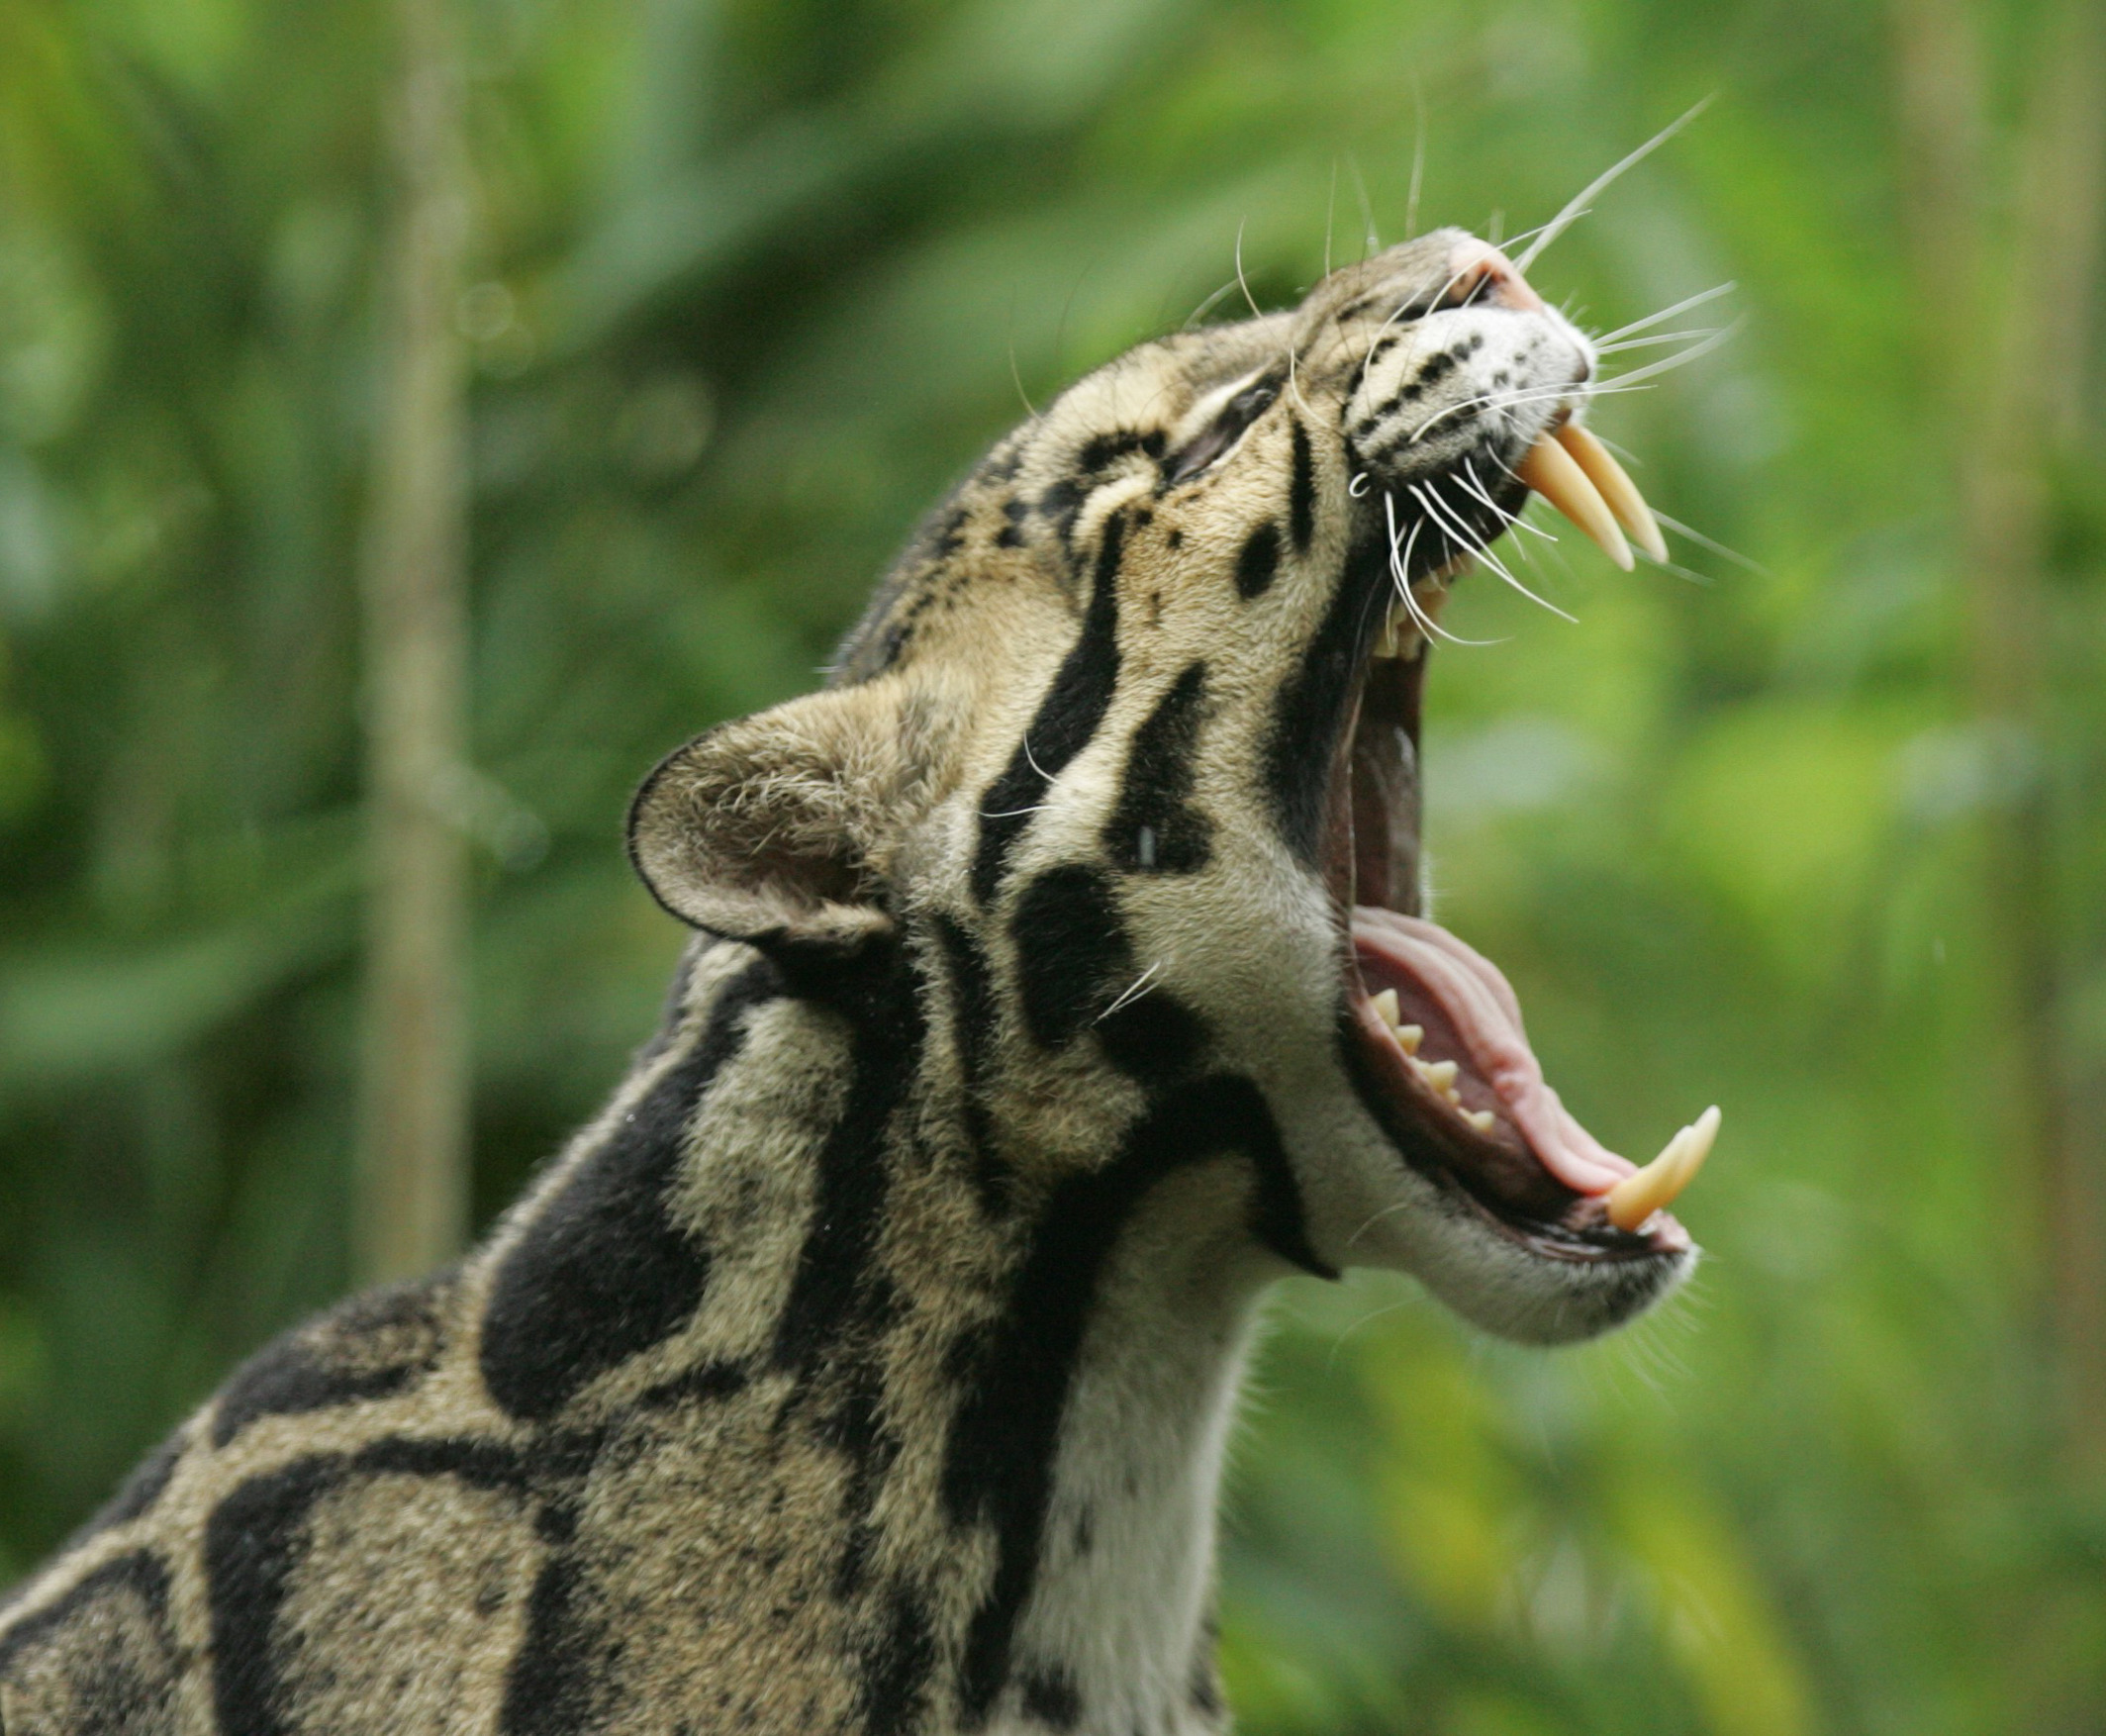 The Taiwanese Clouded Leopard appears after 30 years after being ...